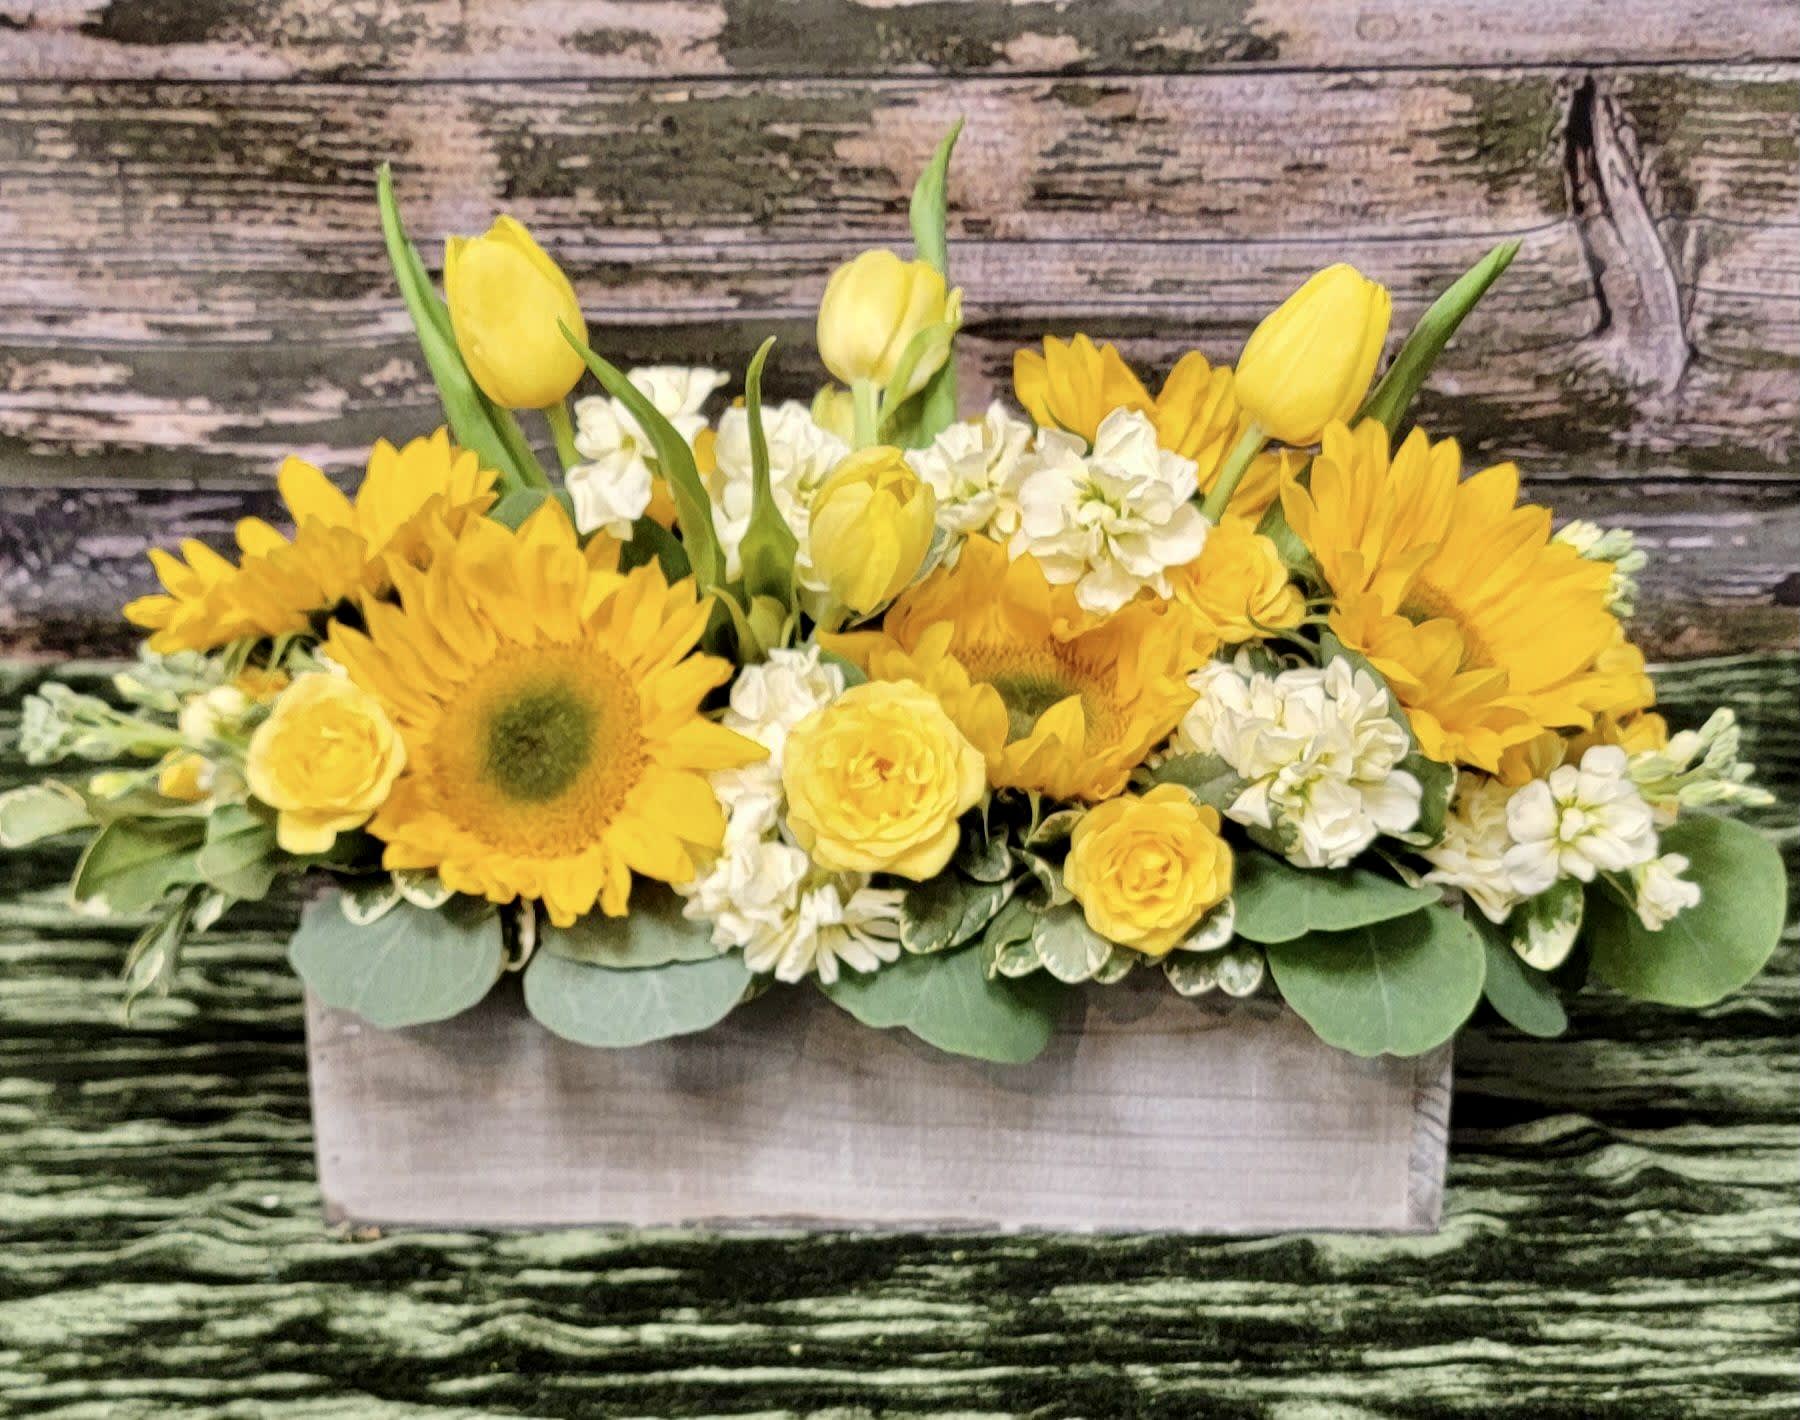 SunShine Garden  - Blooming with Sunshine this Garden of Sunflowers, Roses, Tulips and Stock will brighten any day !